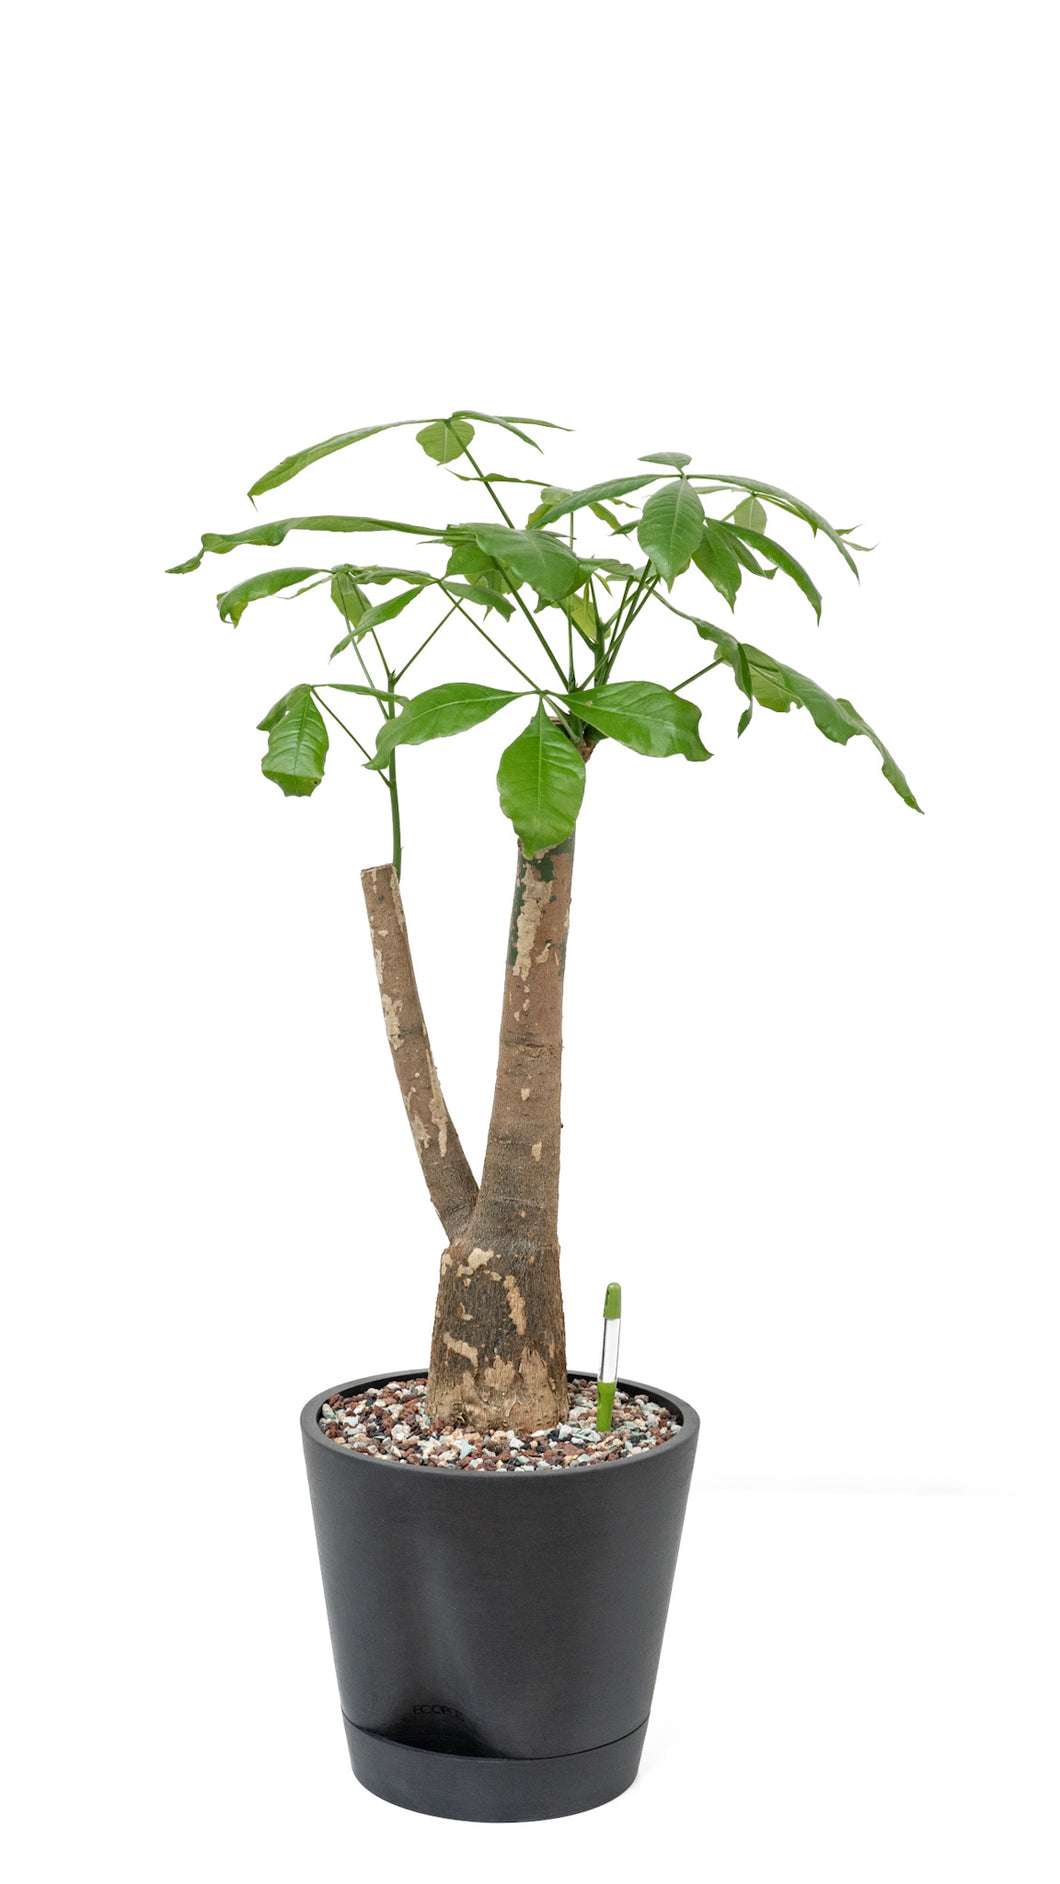 Bonsai Money Plant (M2) in Shopleaf Rainbow Pon Substrate with Sustee